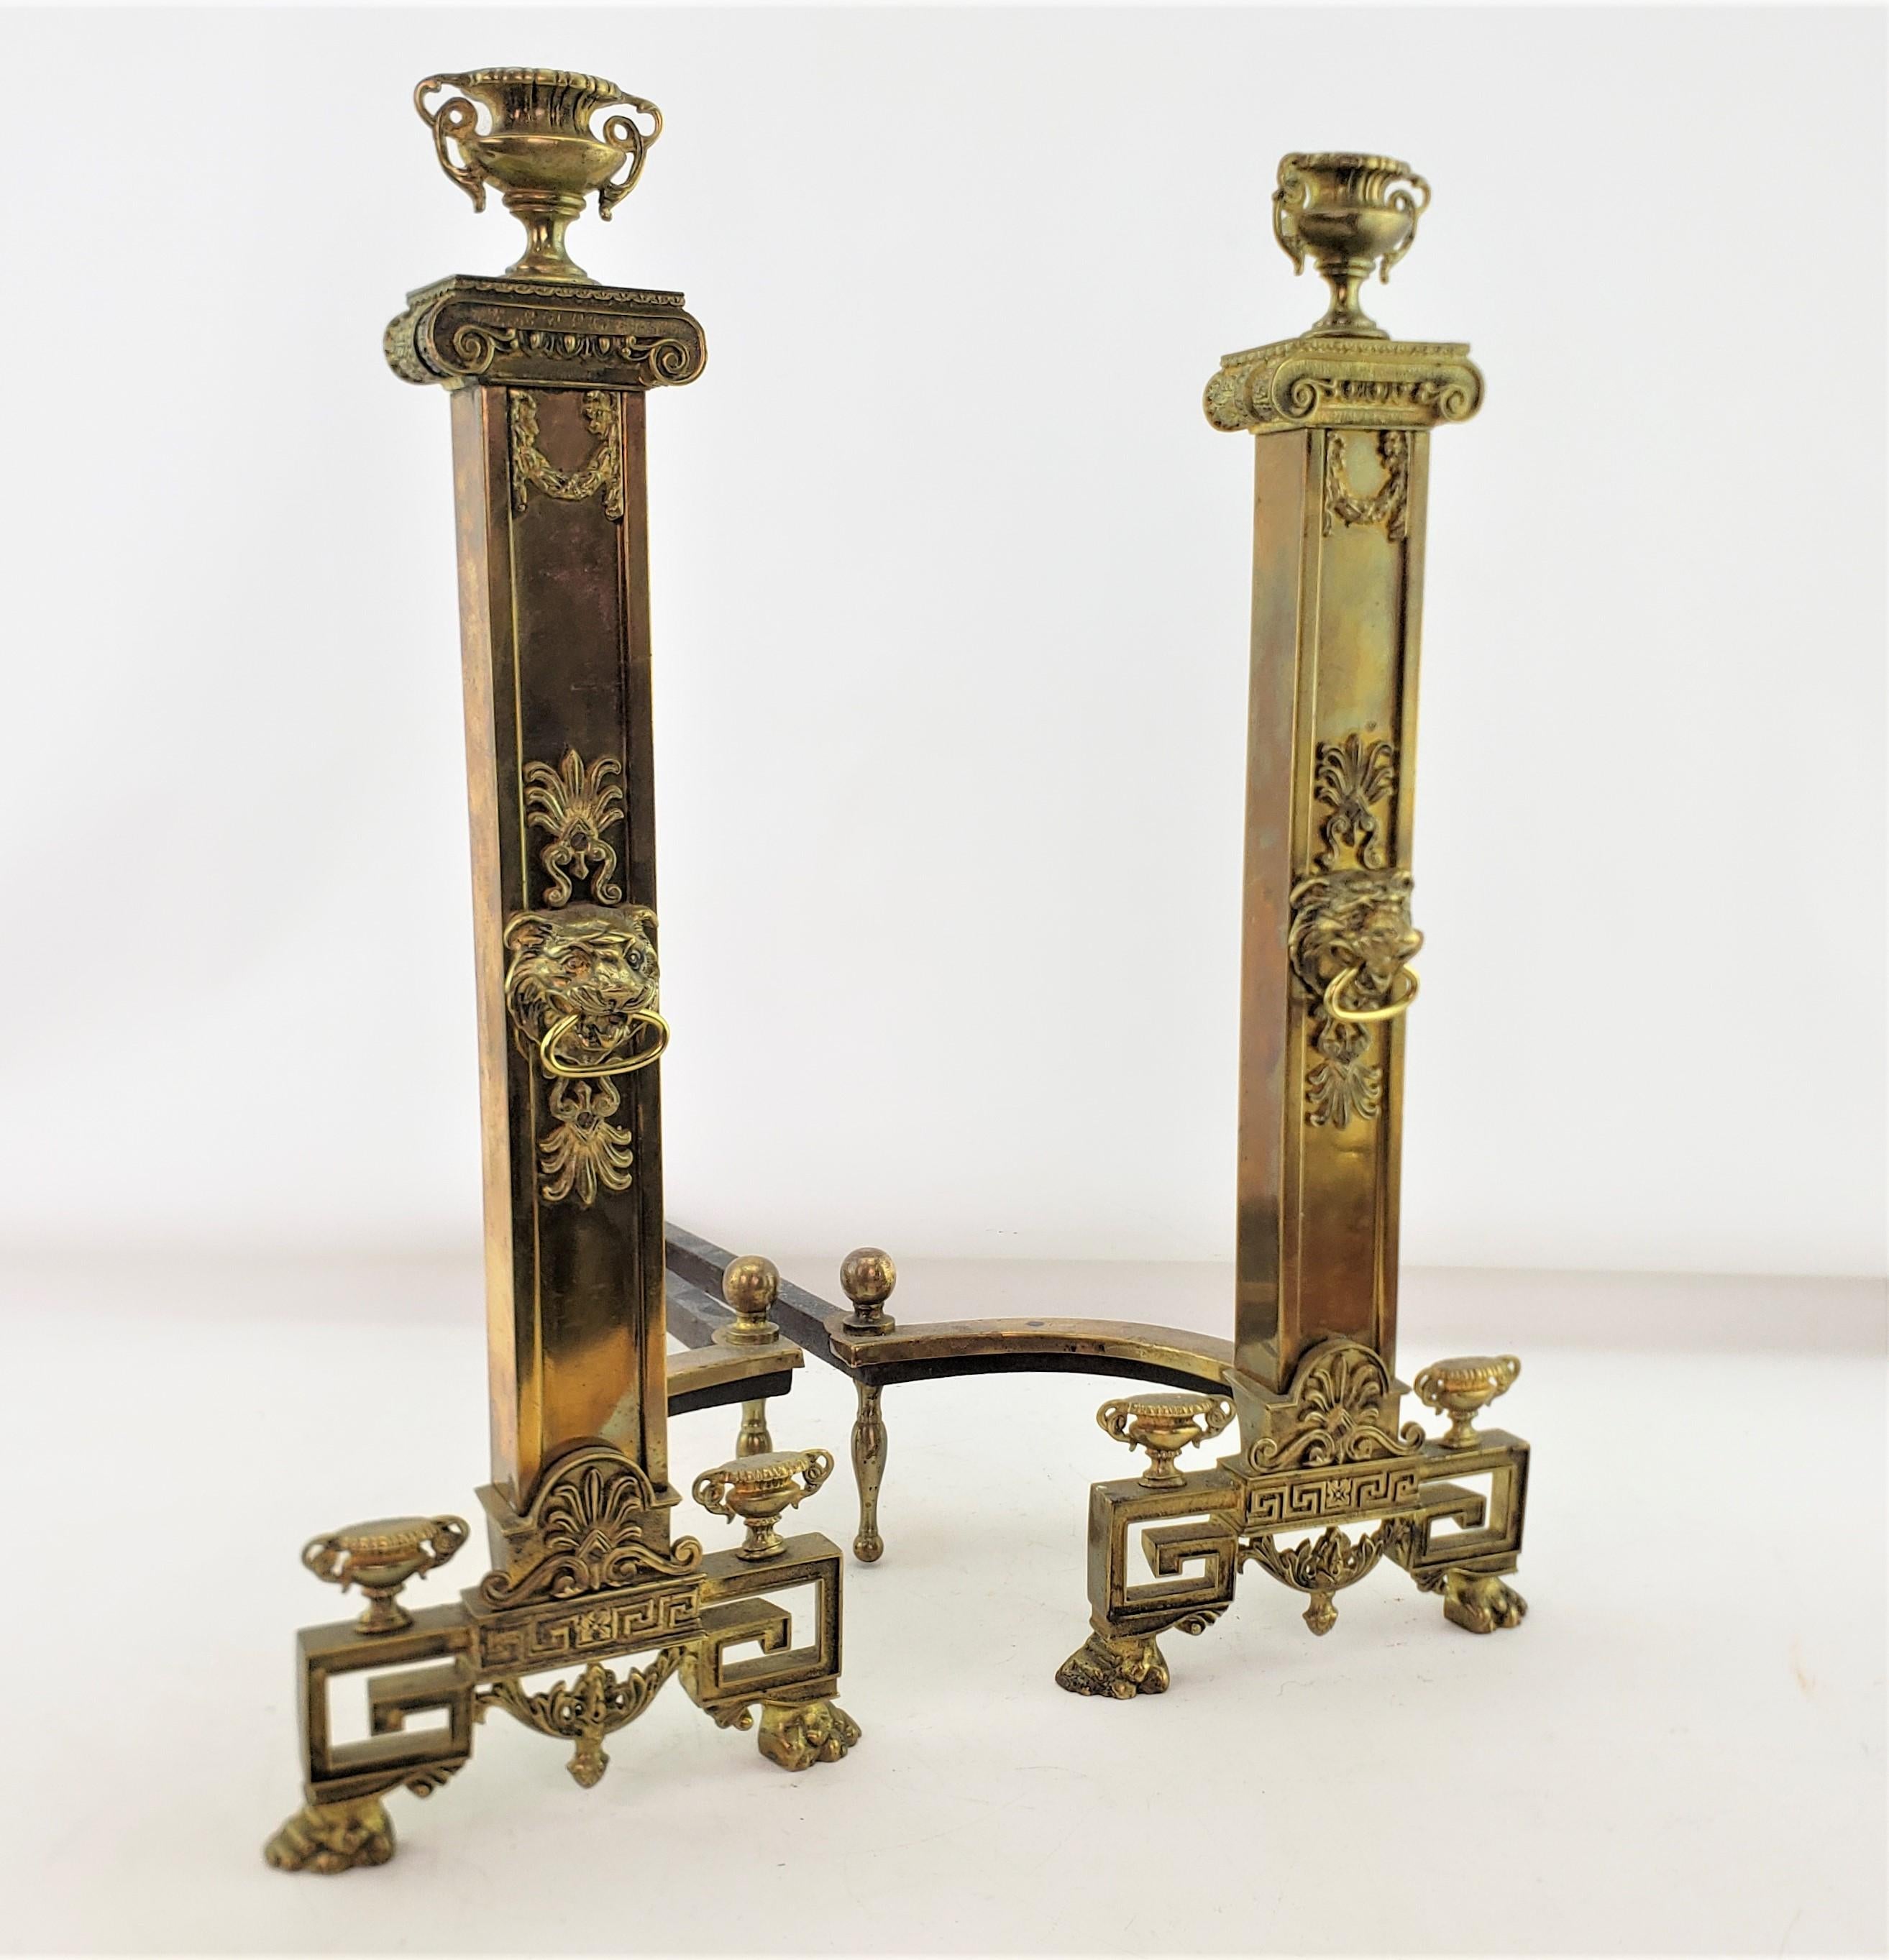 Cast Antique Neoclassical Styled Andirons with Brass Urns & Lion Head Accents For Sale